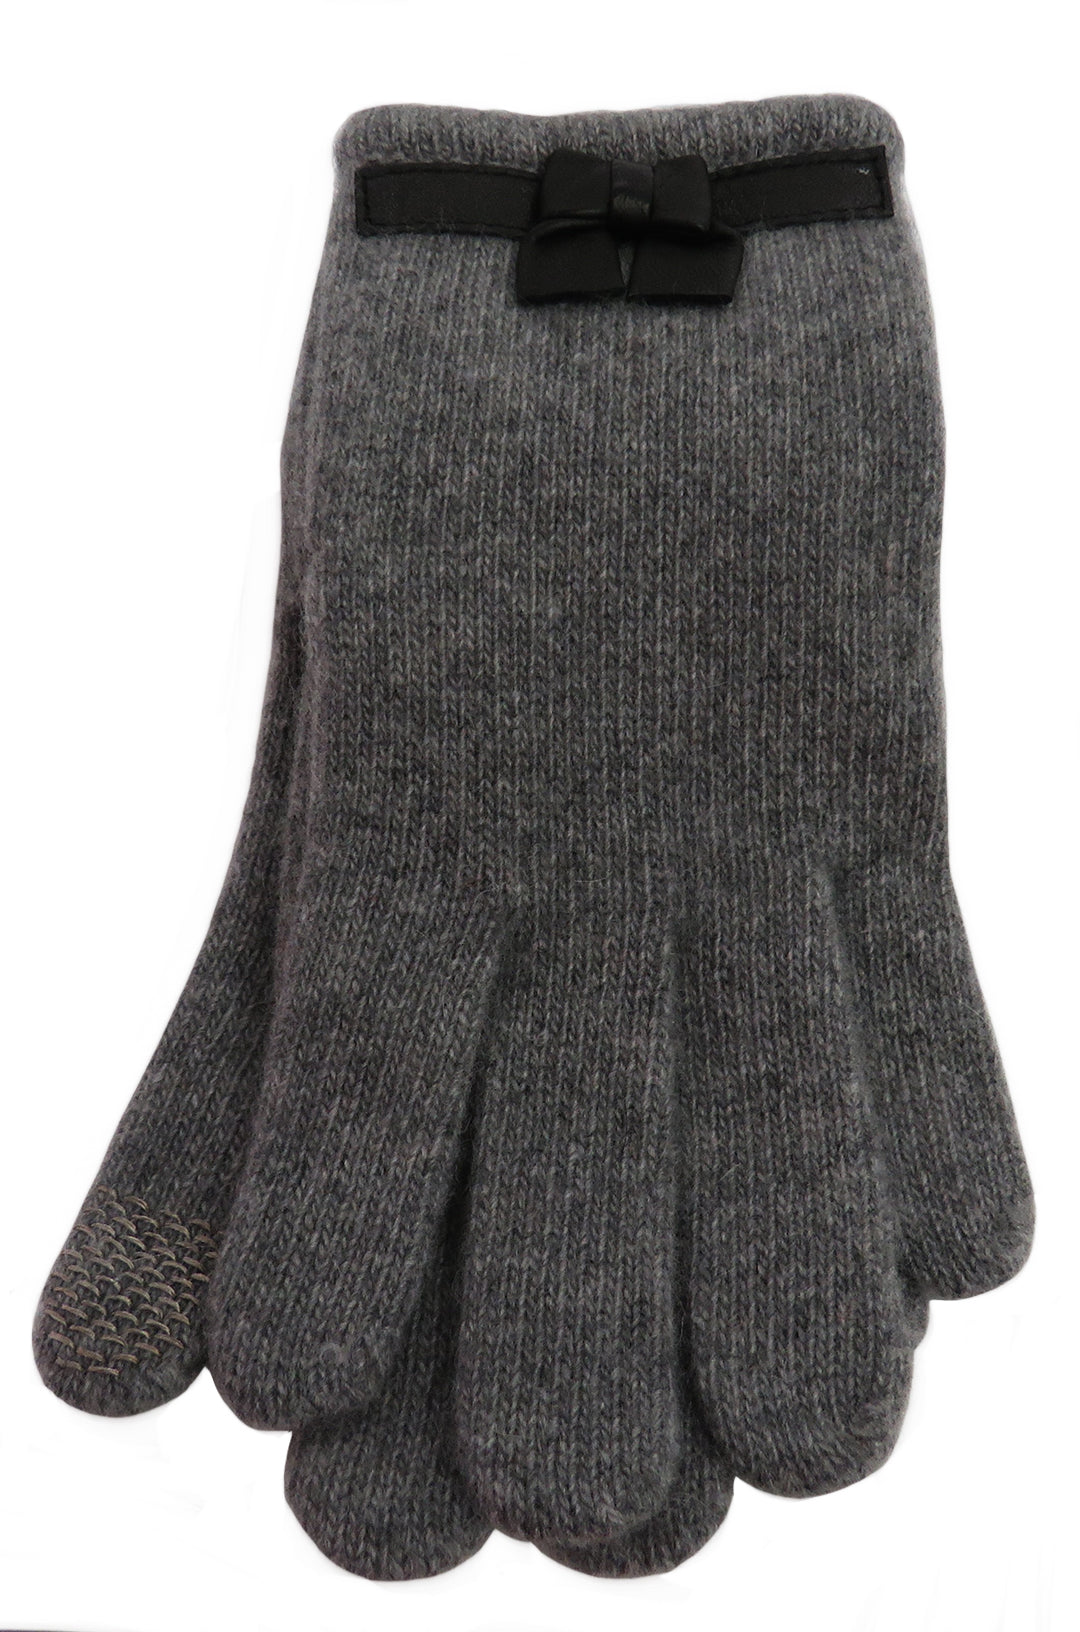 Cashmere glove with Leather bow and Tech Fingers